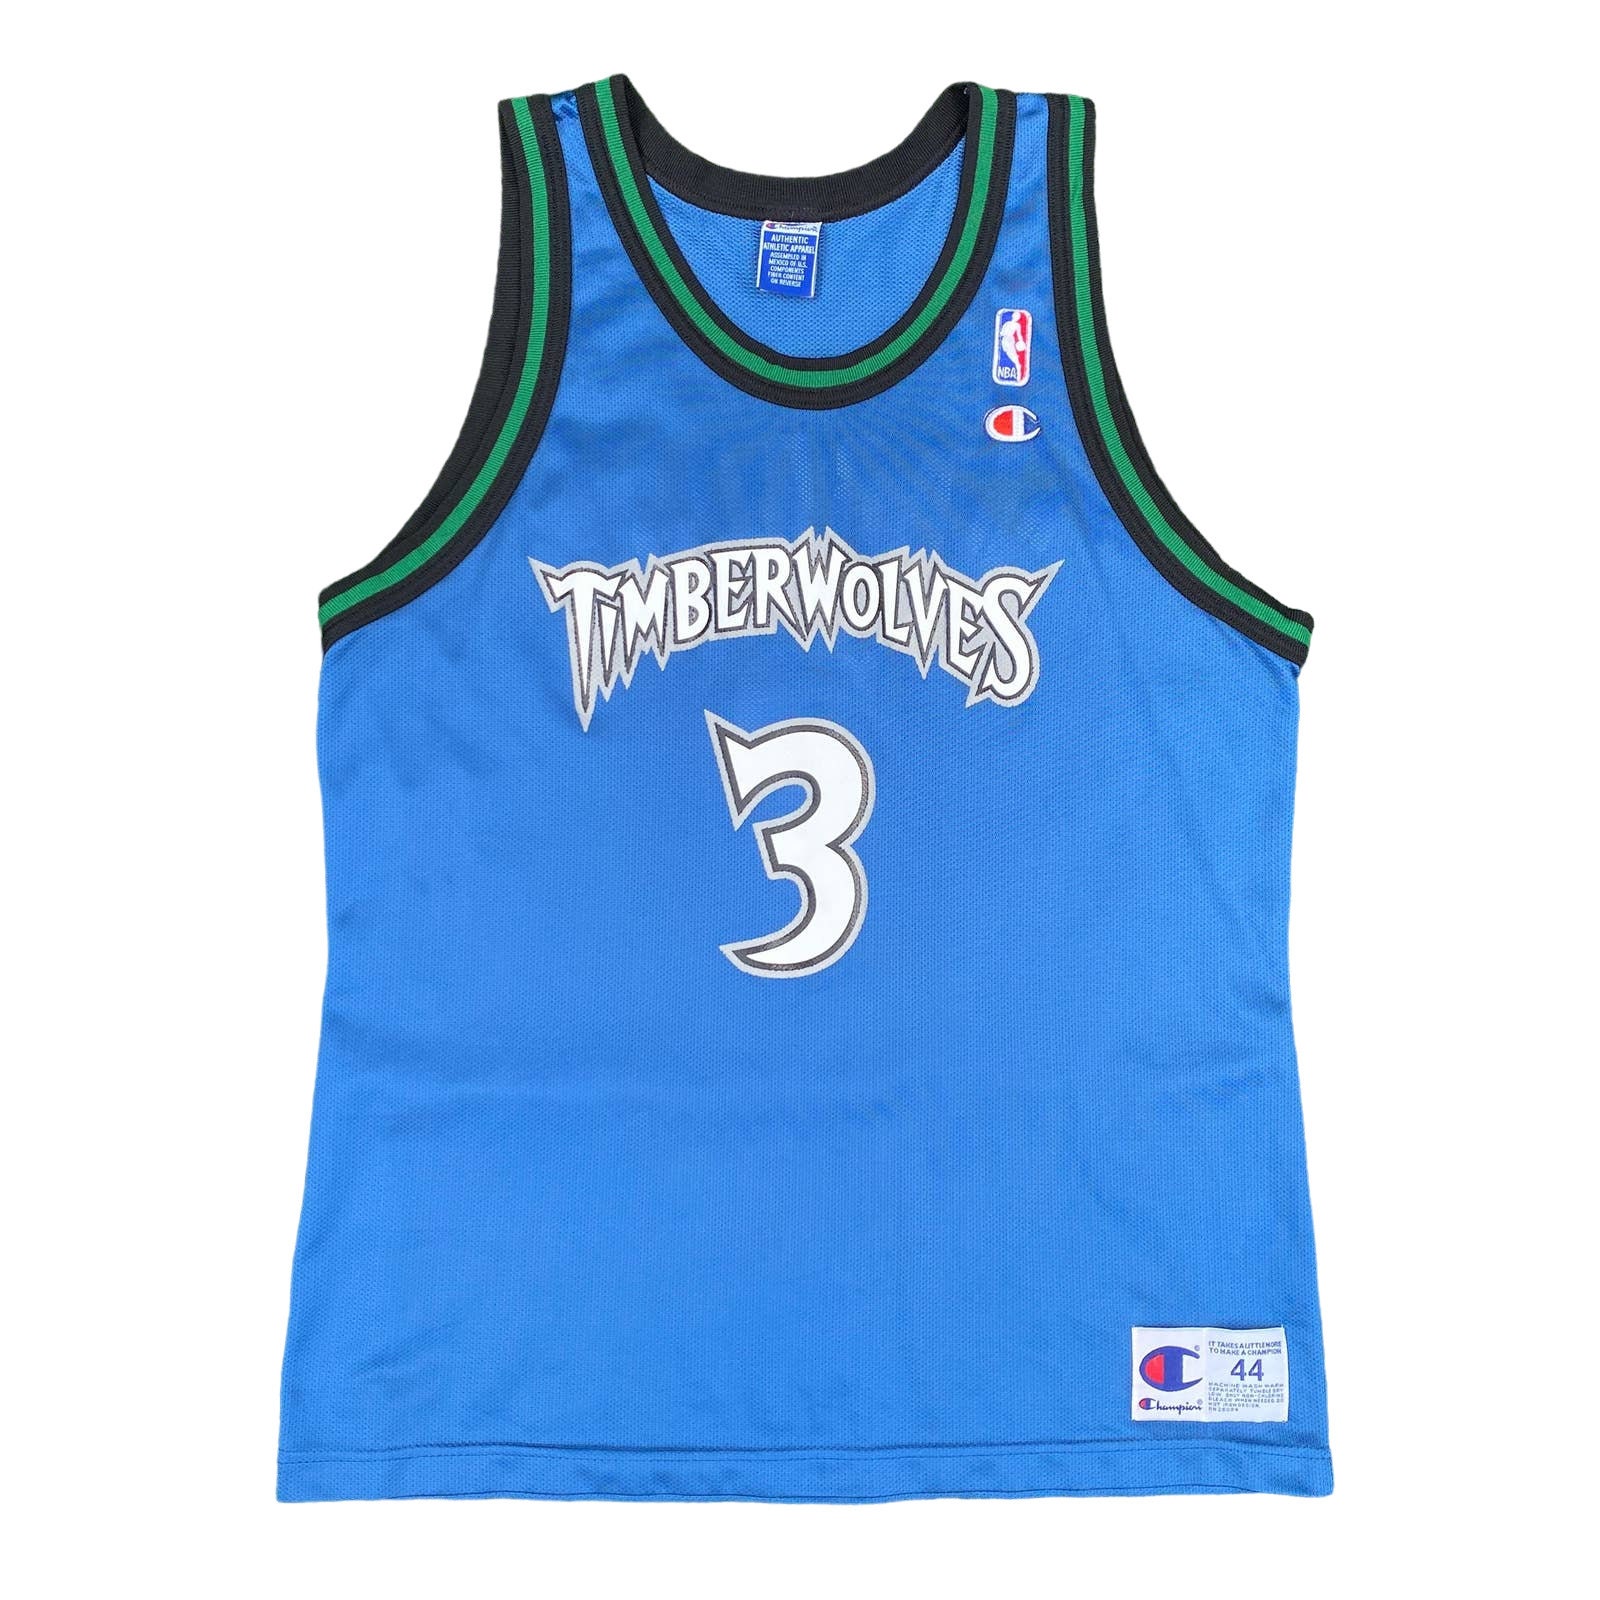 The Official Online Store of the Minnesota Timberwolves